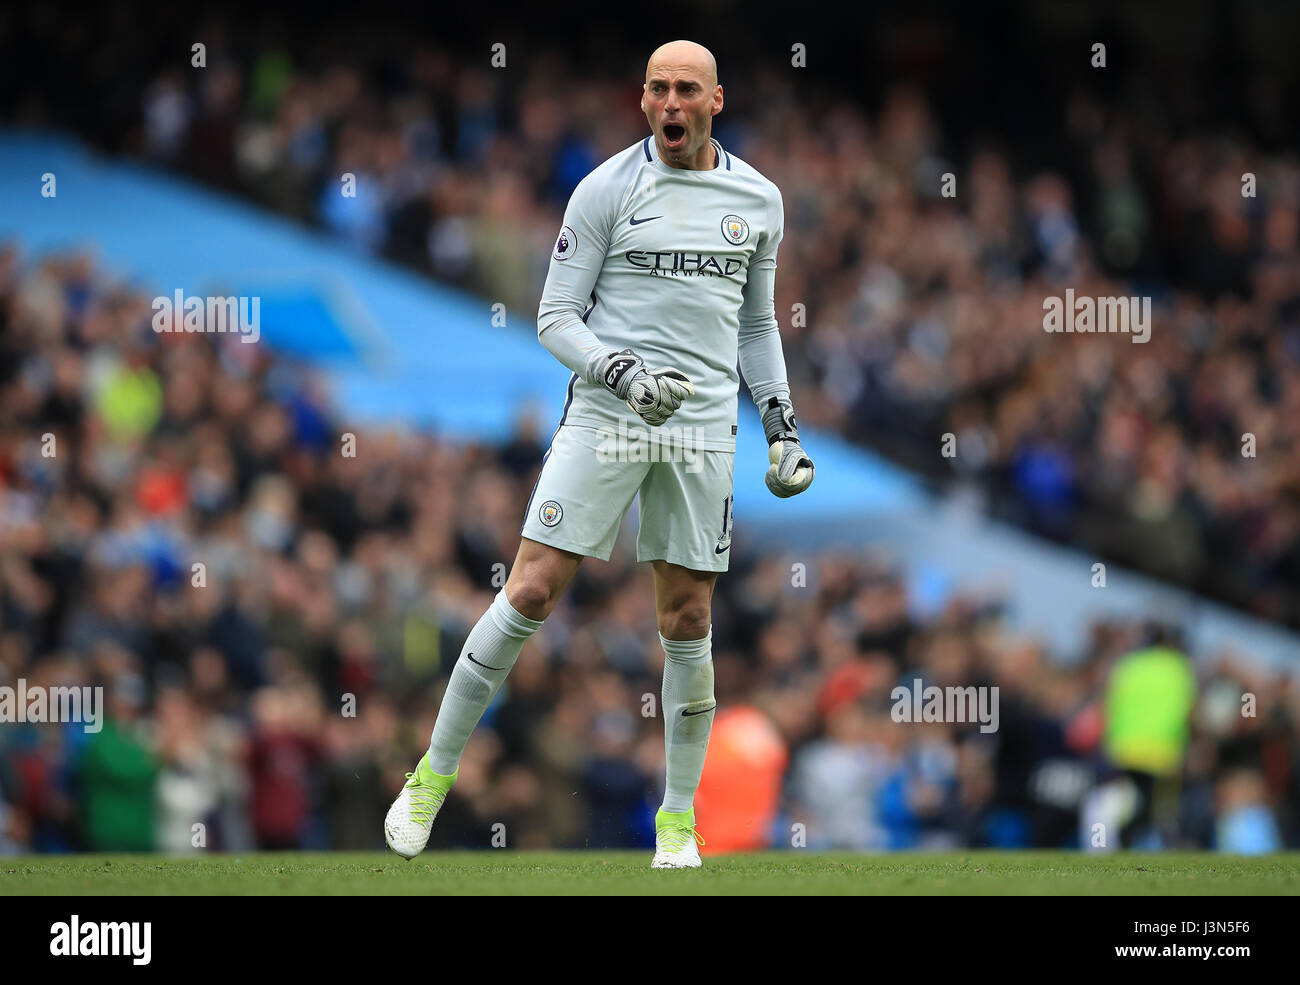 Manchester City goalkeeper Willy Caballero celebrates his side's third goal of the game scored by Kevin De Bruyne during the Premier League match at the Etihad Stadium, Manchester. Stock Photo